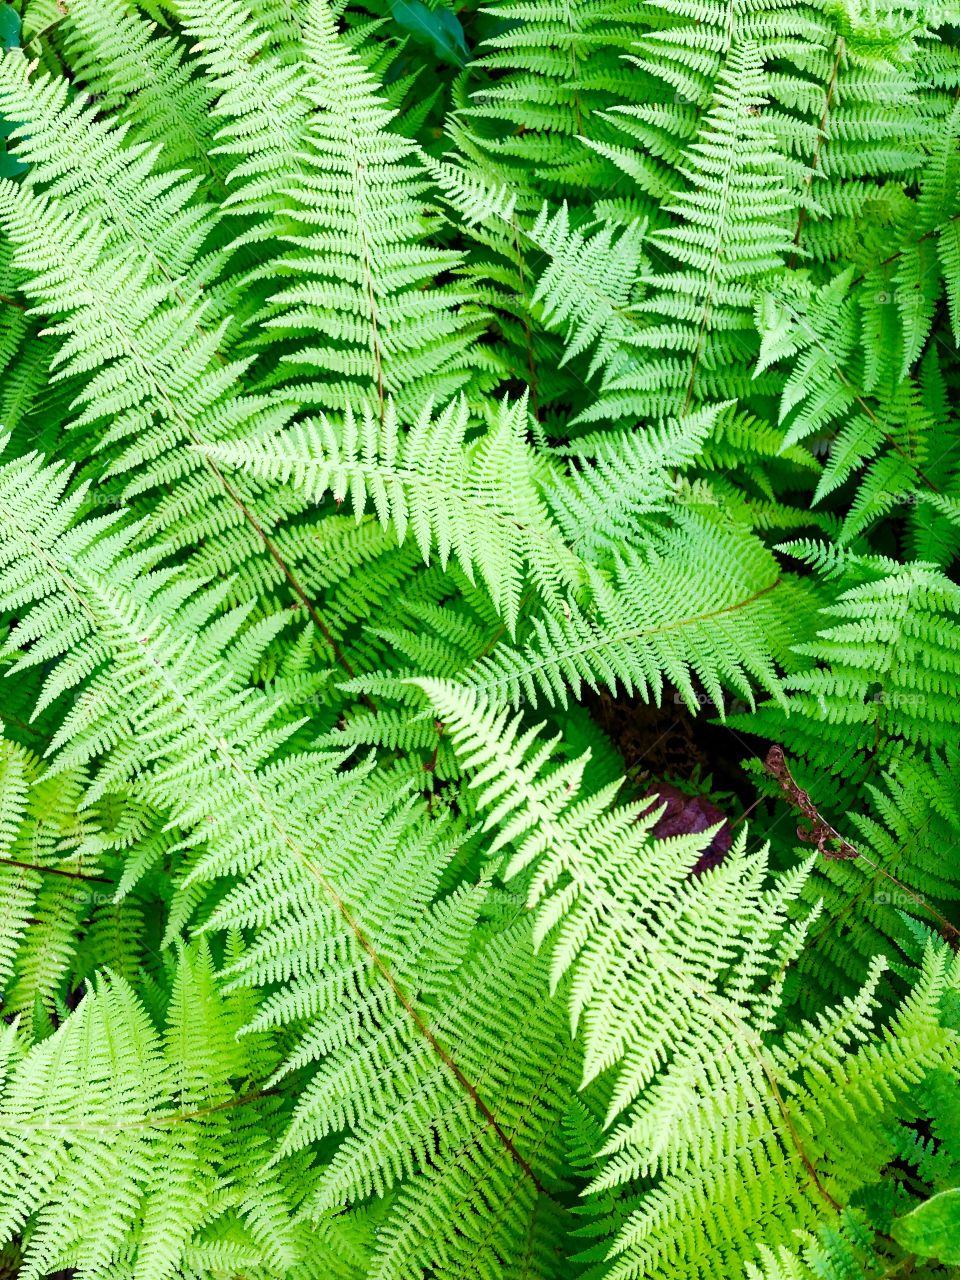 Ferns I the forest